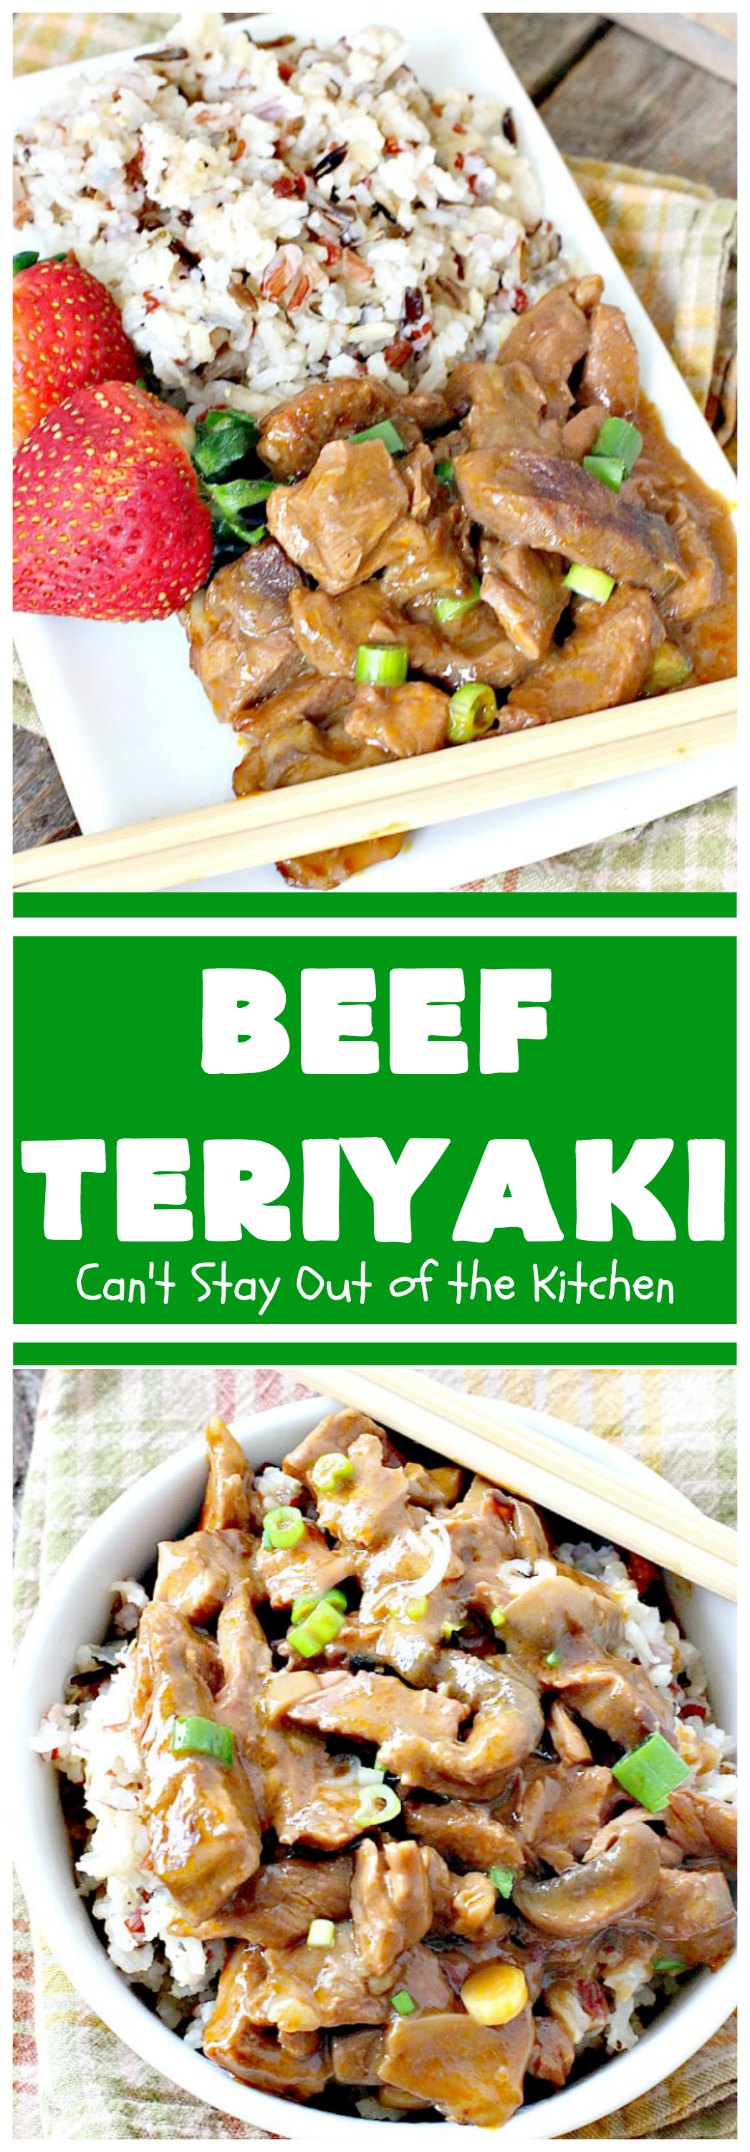 Beef Teriyaki | Can't Stay Out of the Kitchen | sumptuous main dish that's perfect for either family or company dinners. Easy 5-ingredient recipe takes only a couple minutes to prepare and slow cooks in the oven. #beef 